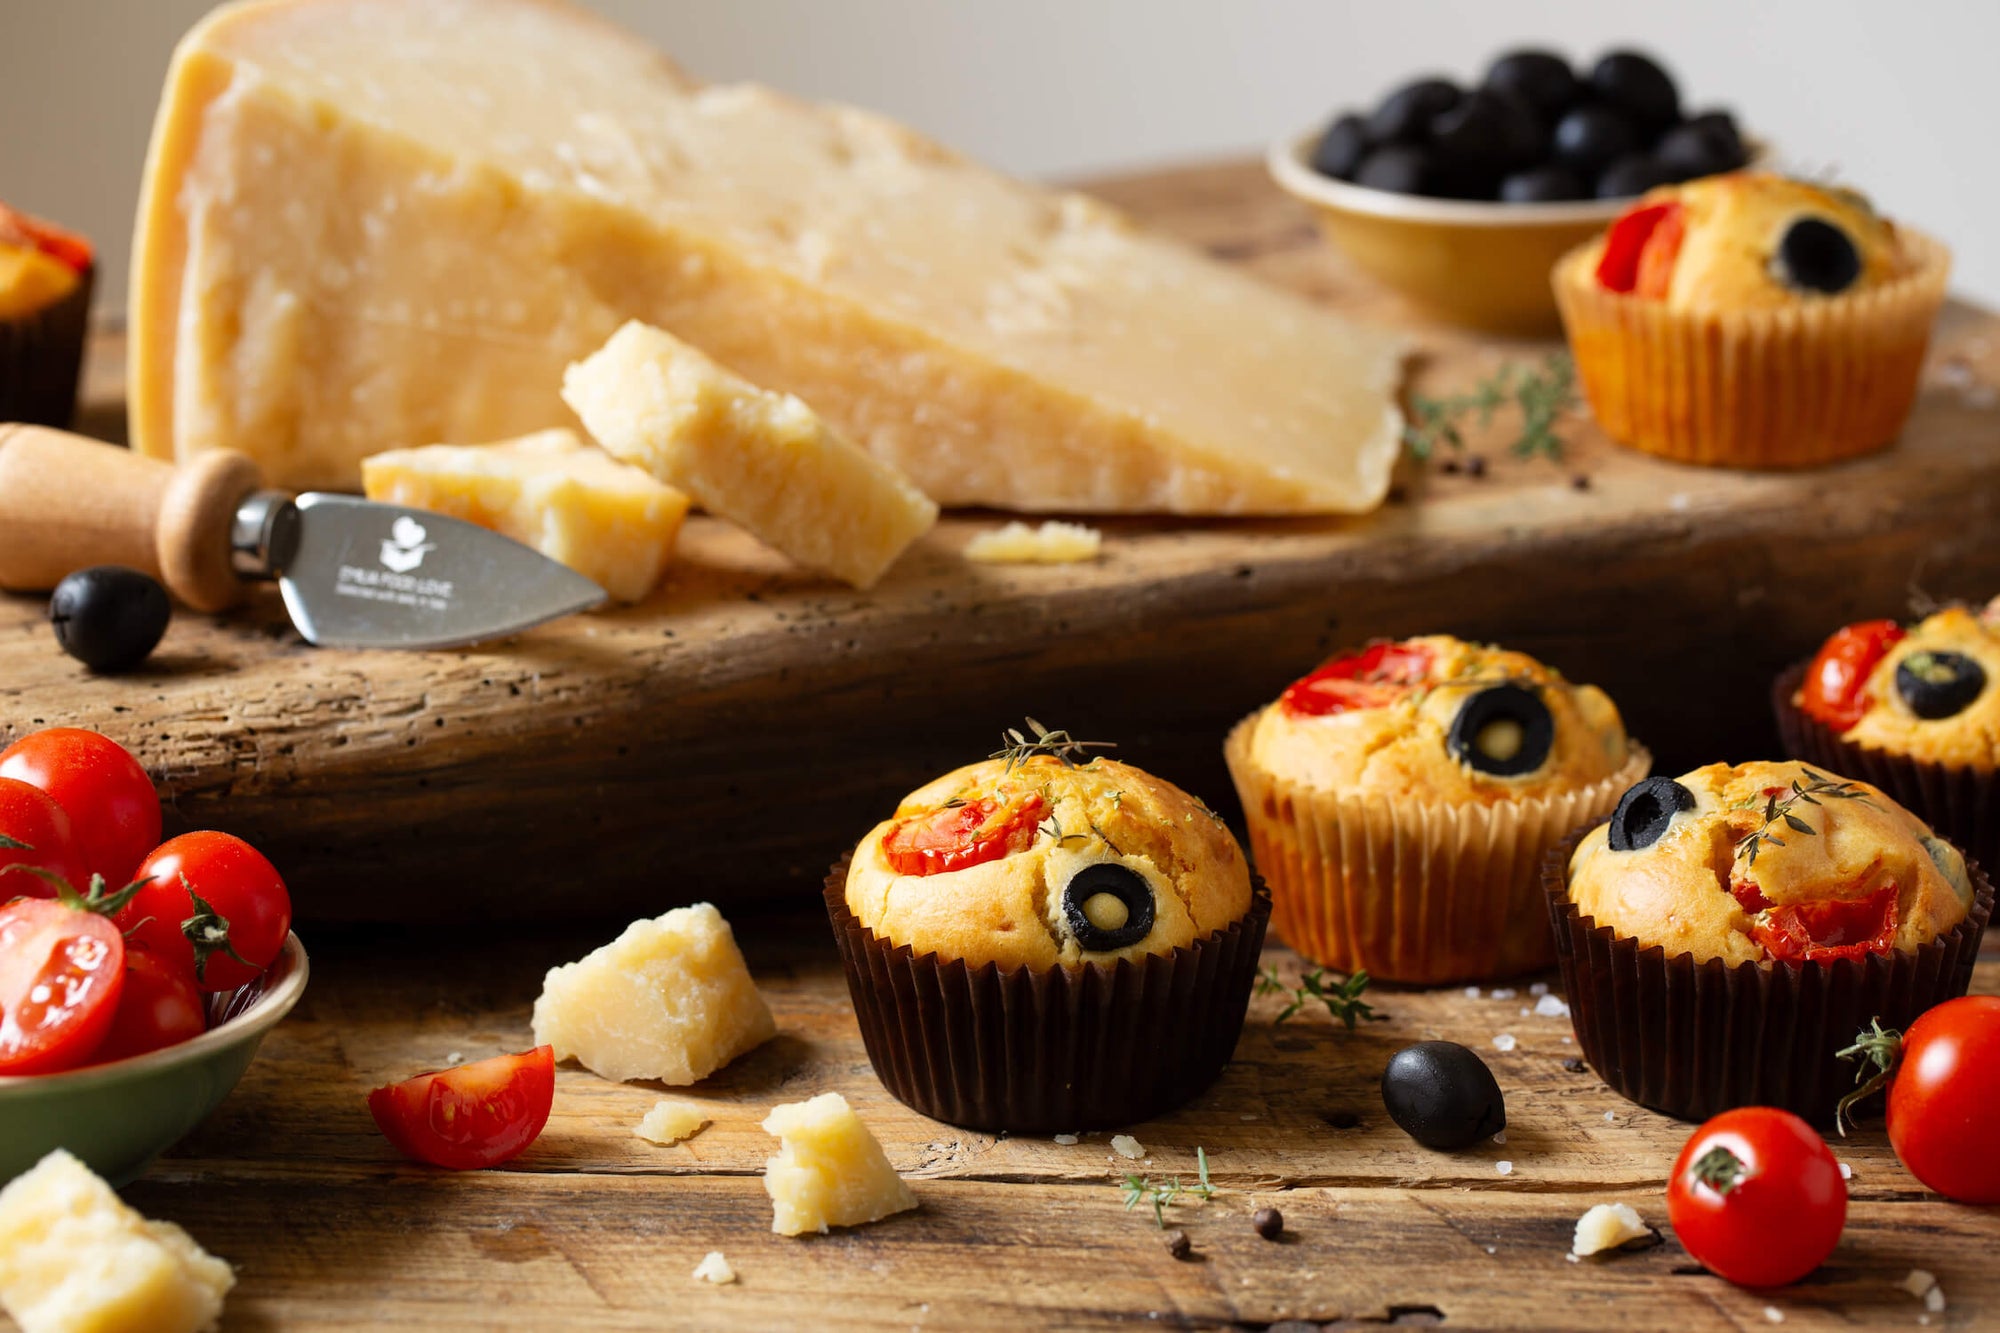 Savory Parmigiano Reggiano muffins with olives and cherry tomatoes